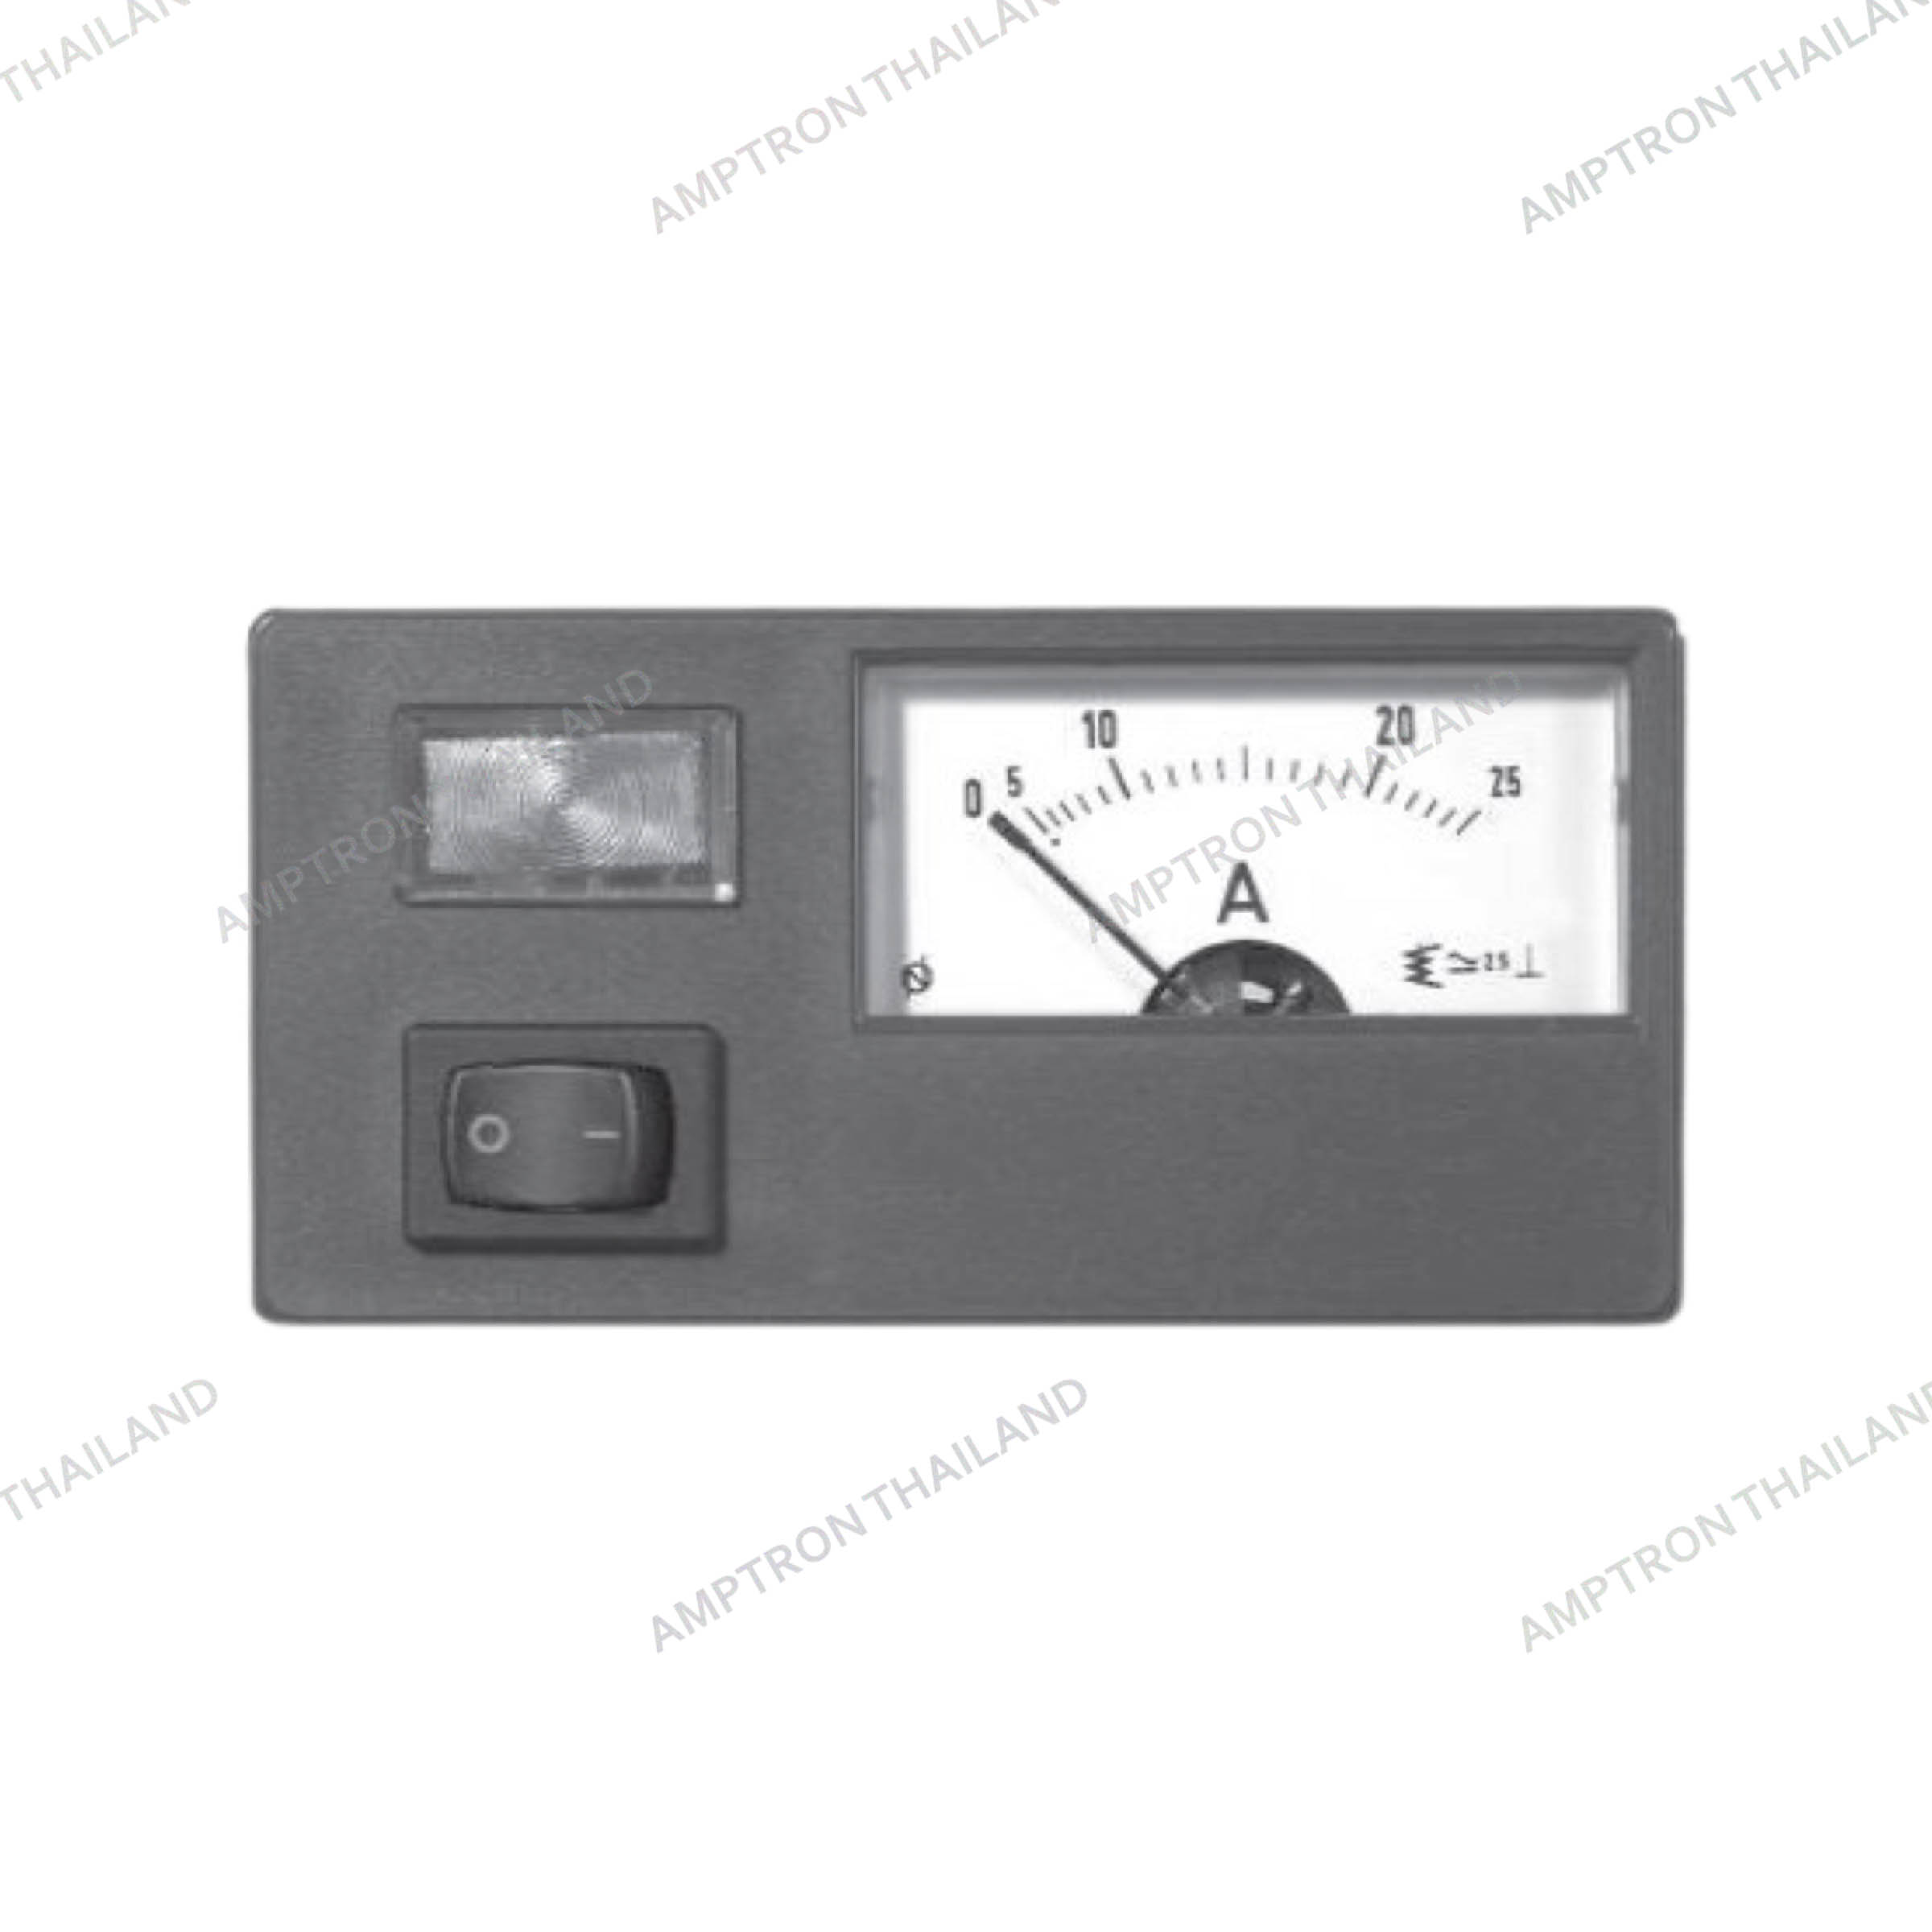 Moving-Iron Special Panel Meter for direct or alternating Current and direct or alternating Voltage (FkN2)